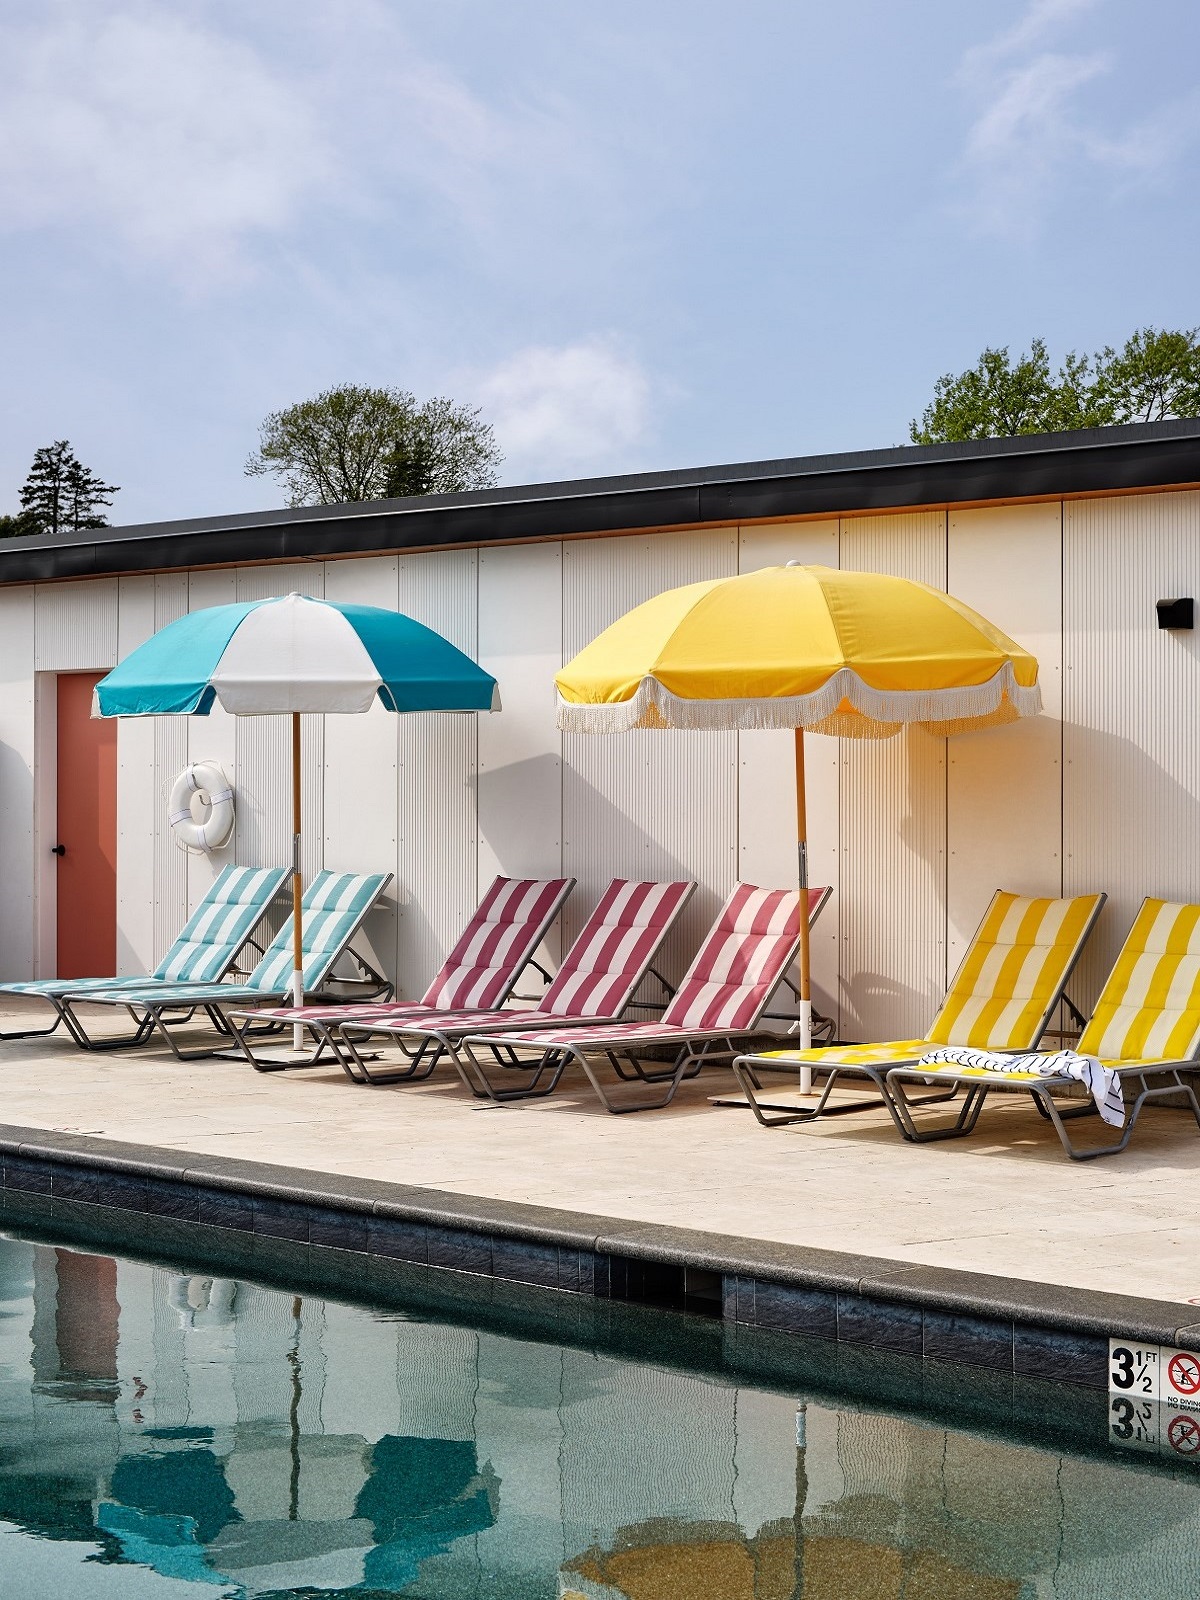 colourful striped loungers and umbrellas in a vintage style around the swimming pool